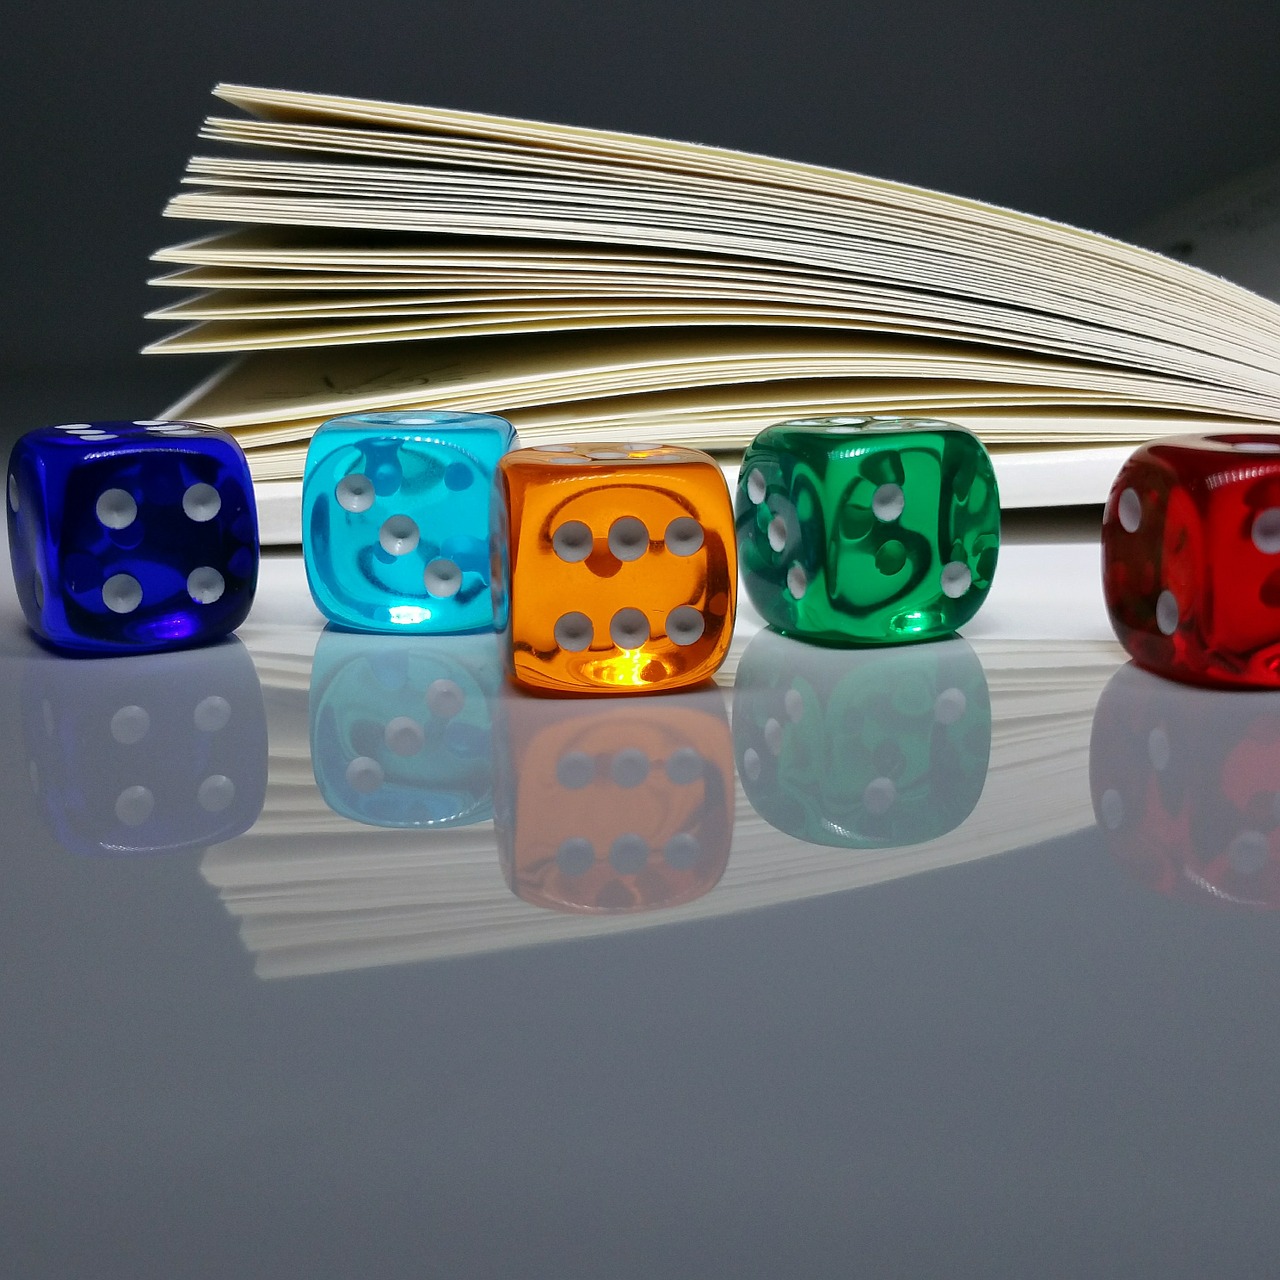 book luck lucky dice free photo